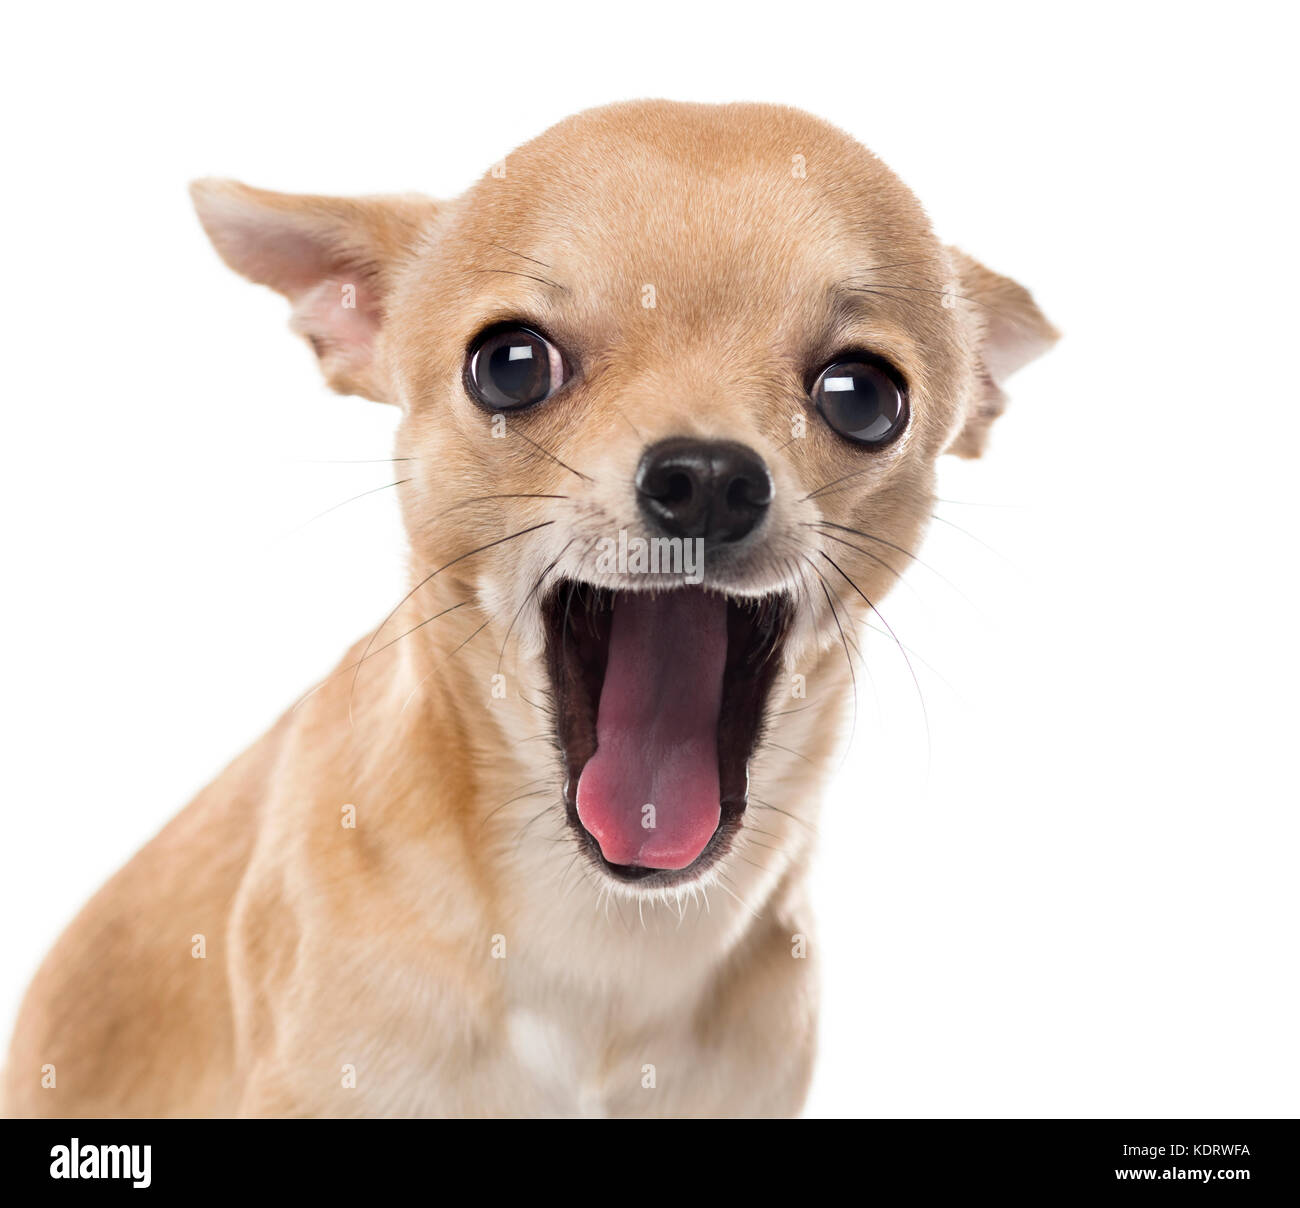 Close-up d'un chihuahua yawning in front of white background Banque D'Images